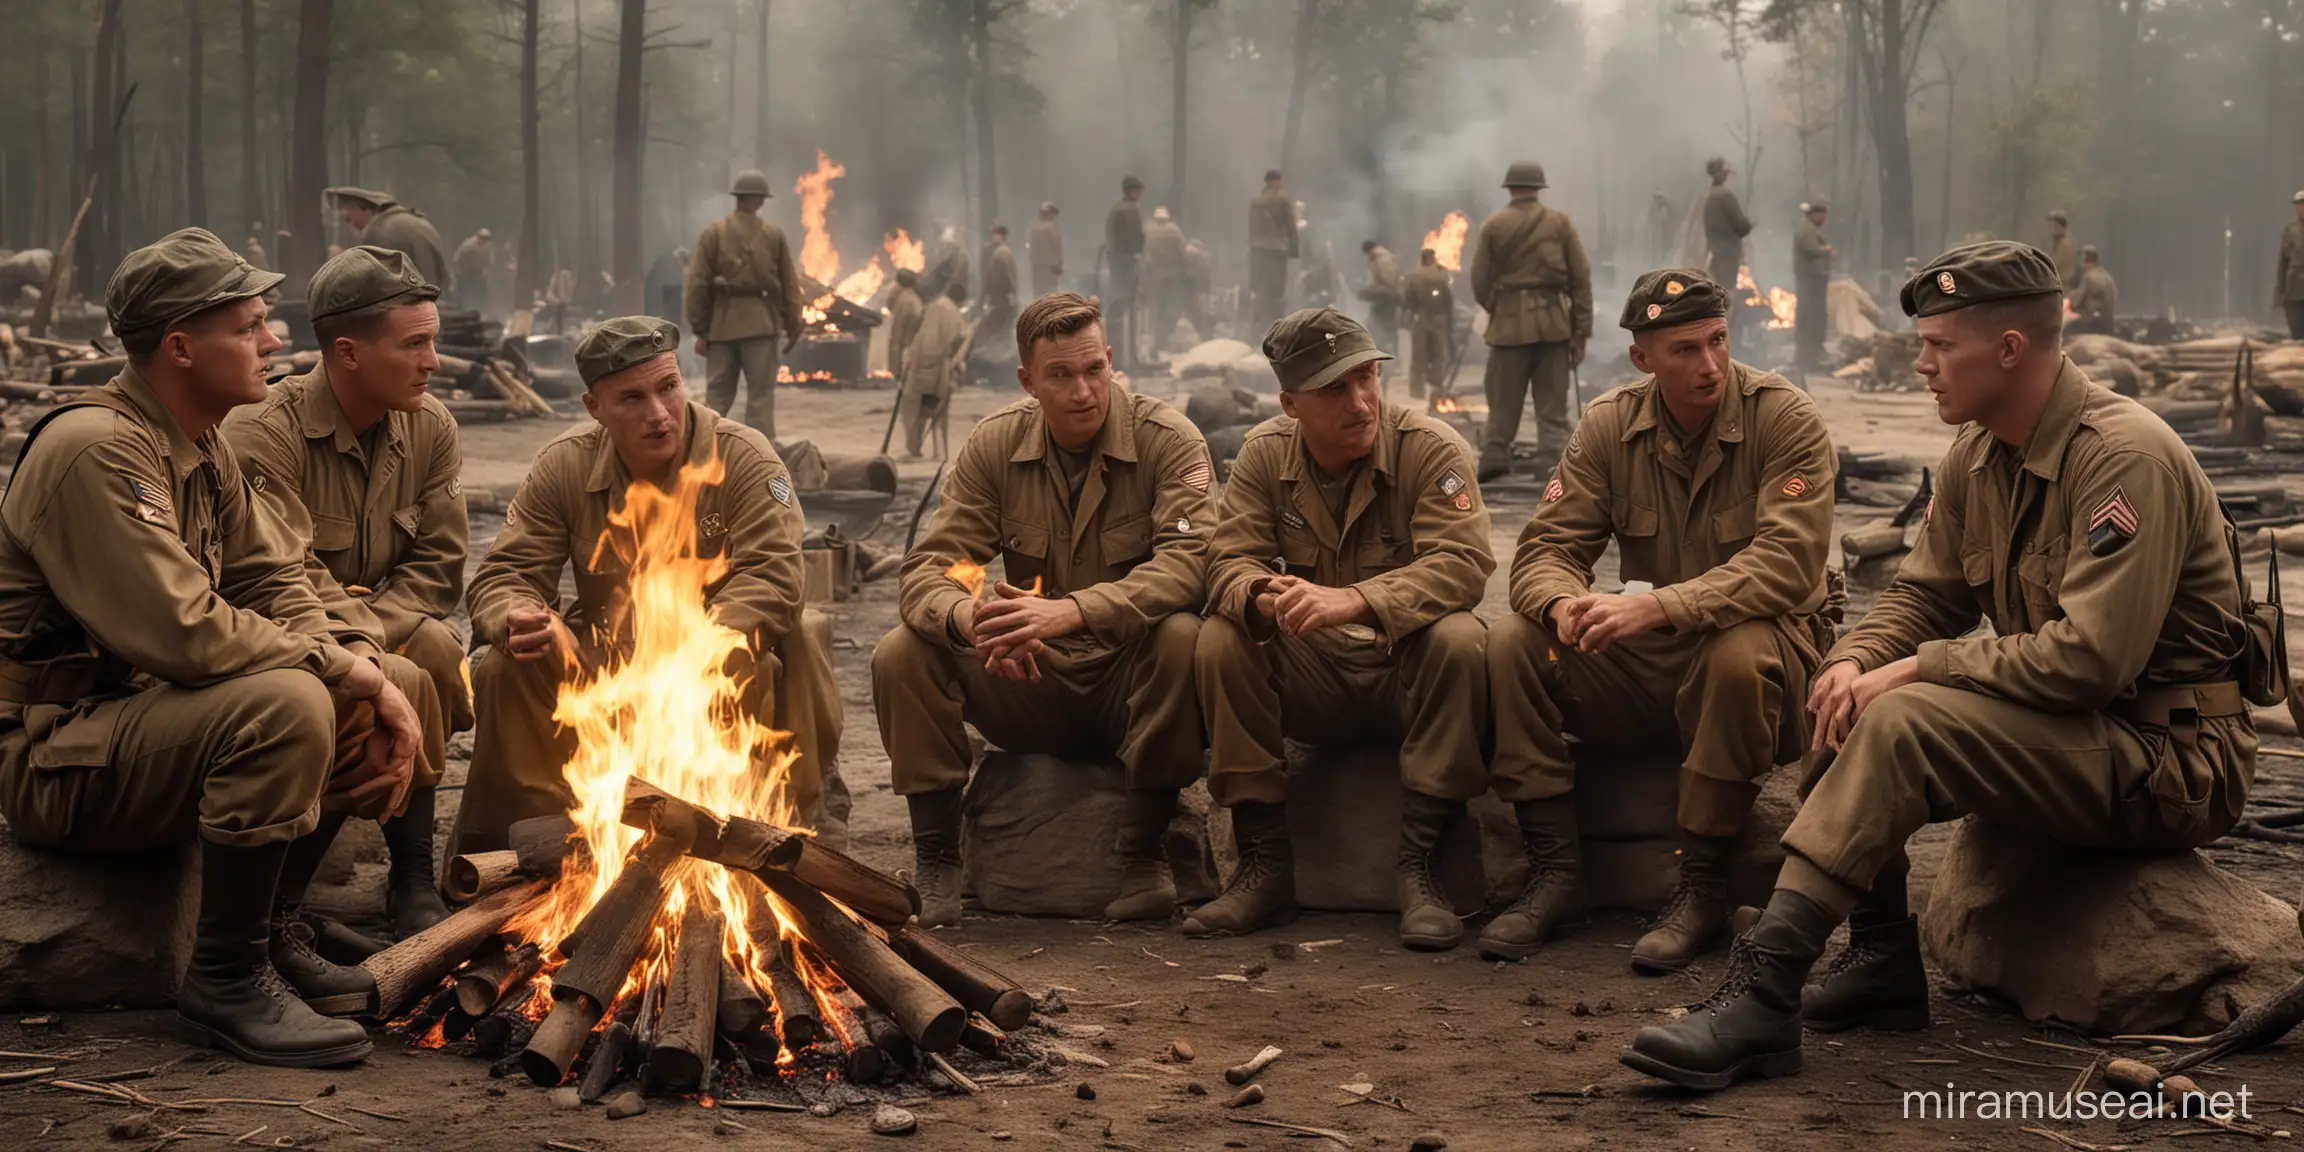 WW2 USA Soldiers Captivated by Campfire Storytelling